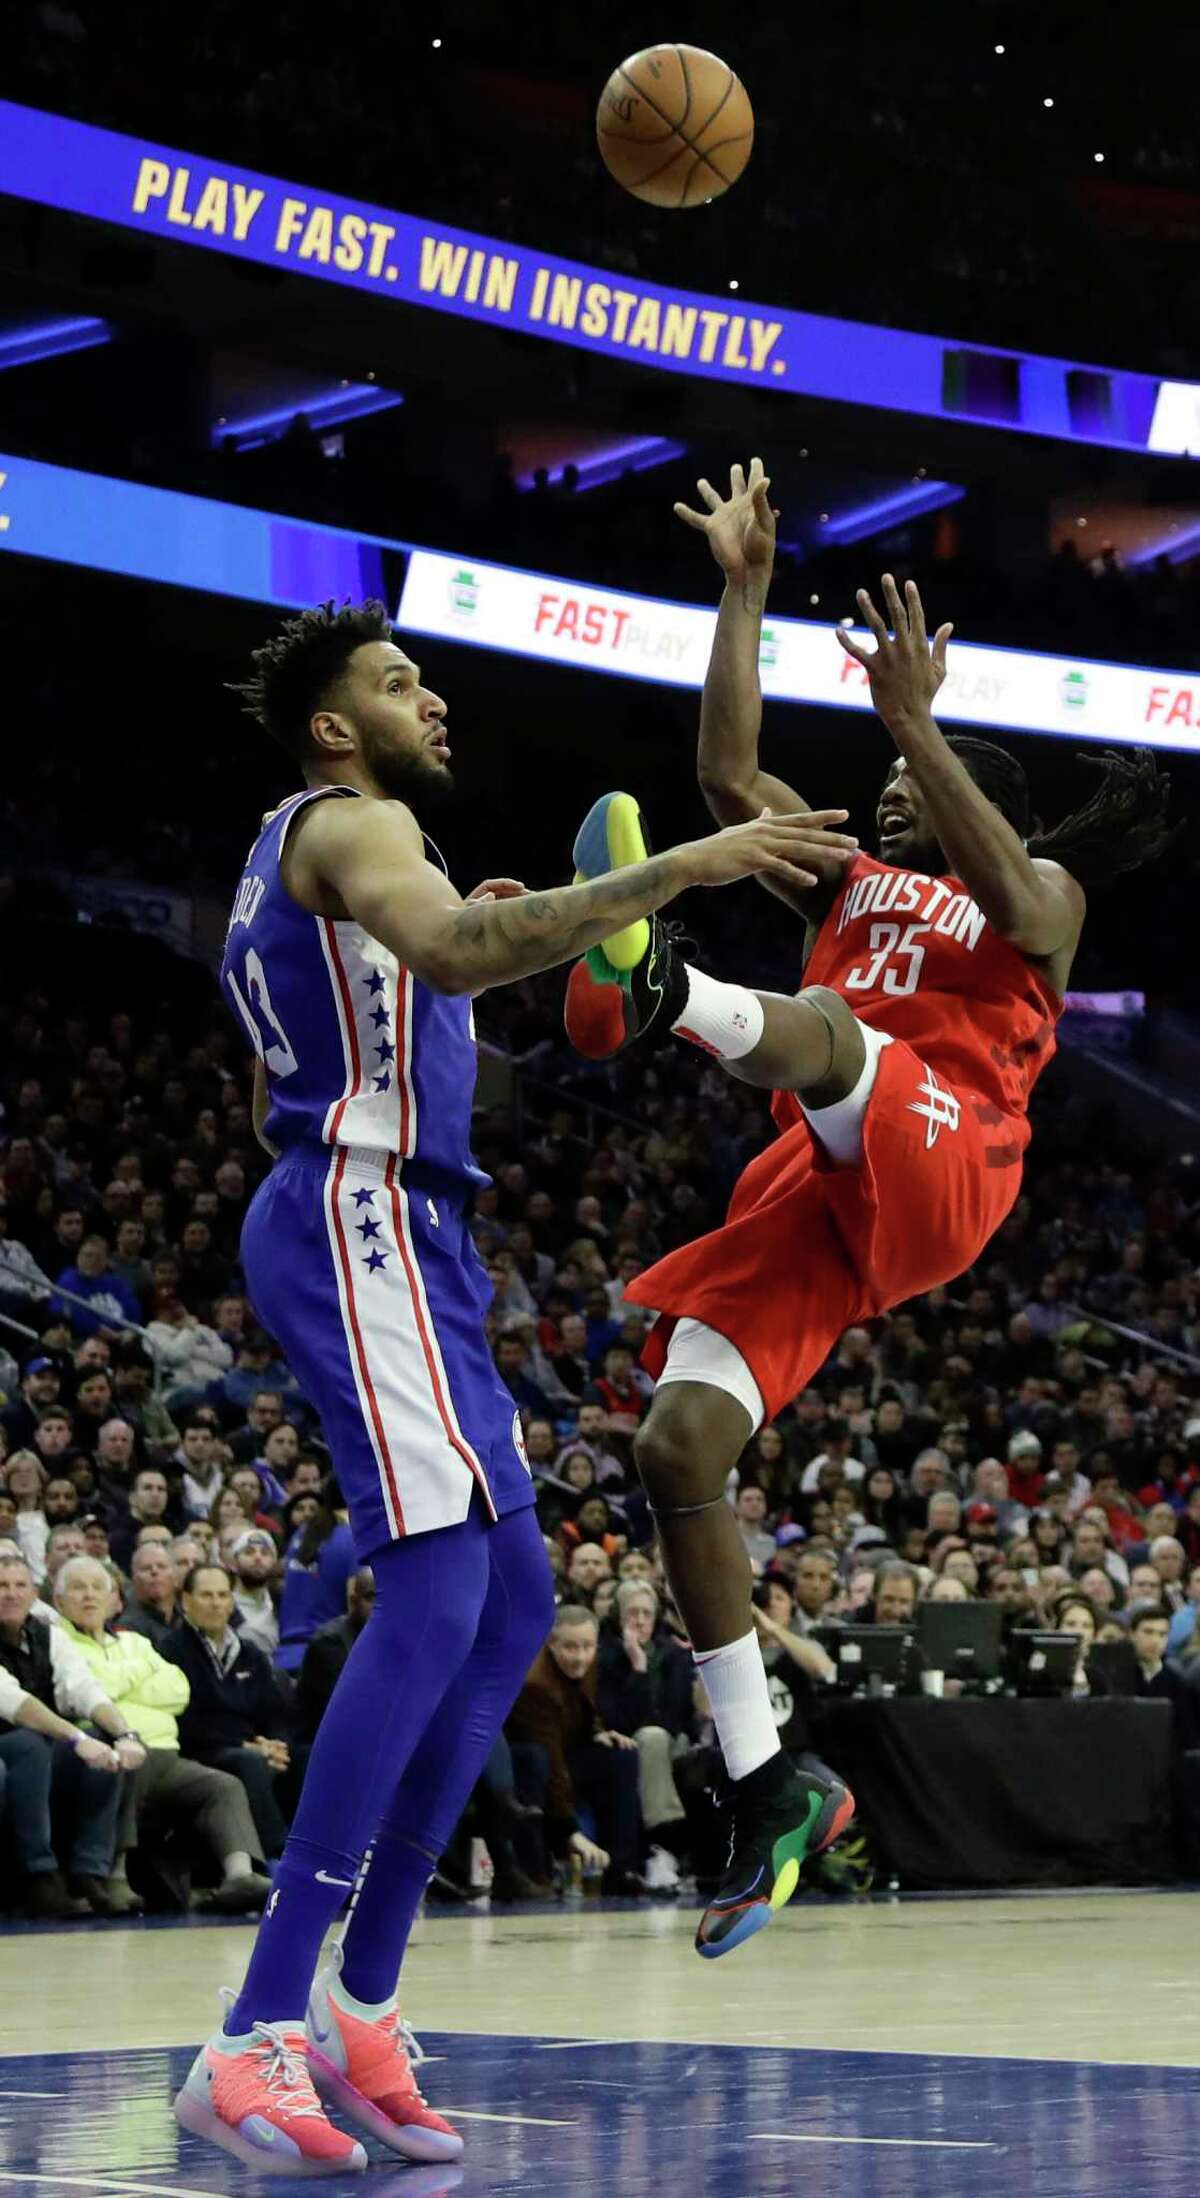 Houston Rockets' Kenneth Faried, right, goes up for a shot against Philadelphia 76ers' Jonah Bolden during the first half of an NBA basketball game, Monday, Jan. 21, 2019, in Philadelphia. (AP Photo/Matt Slocum)